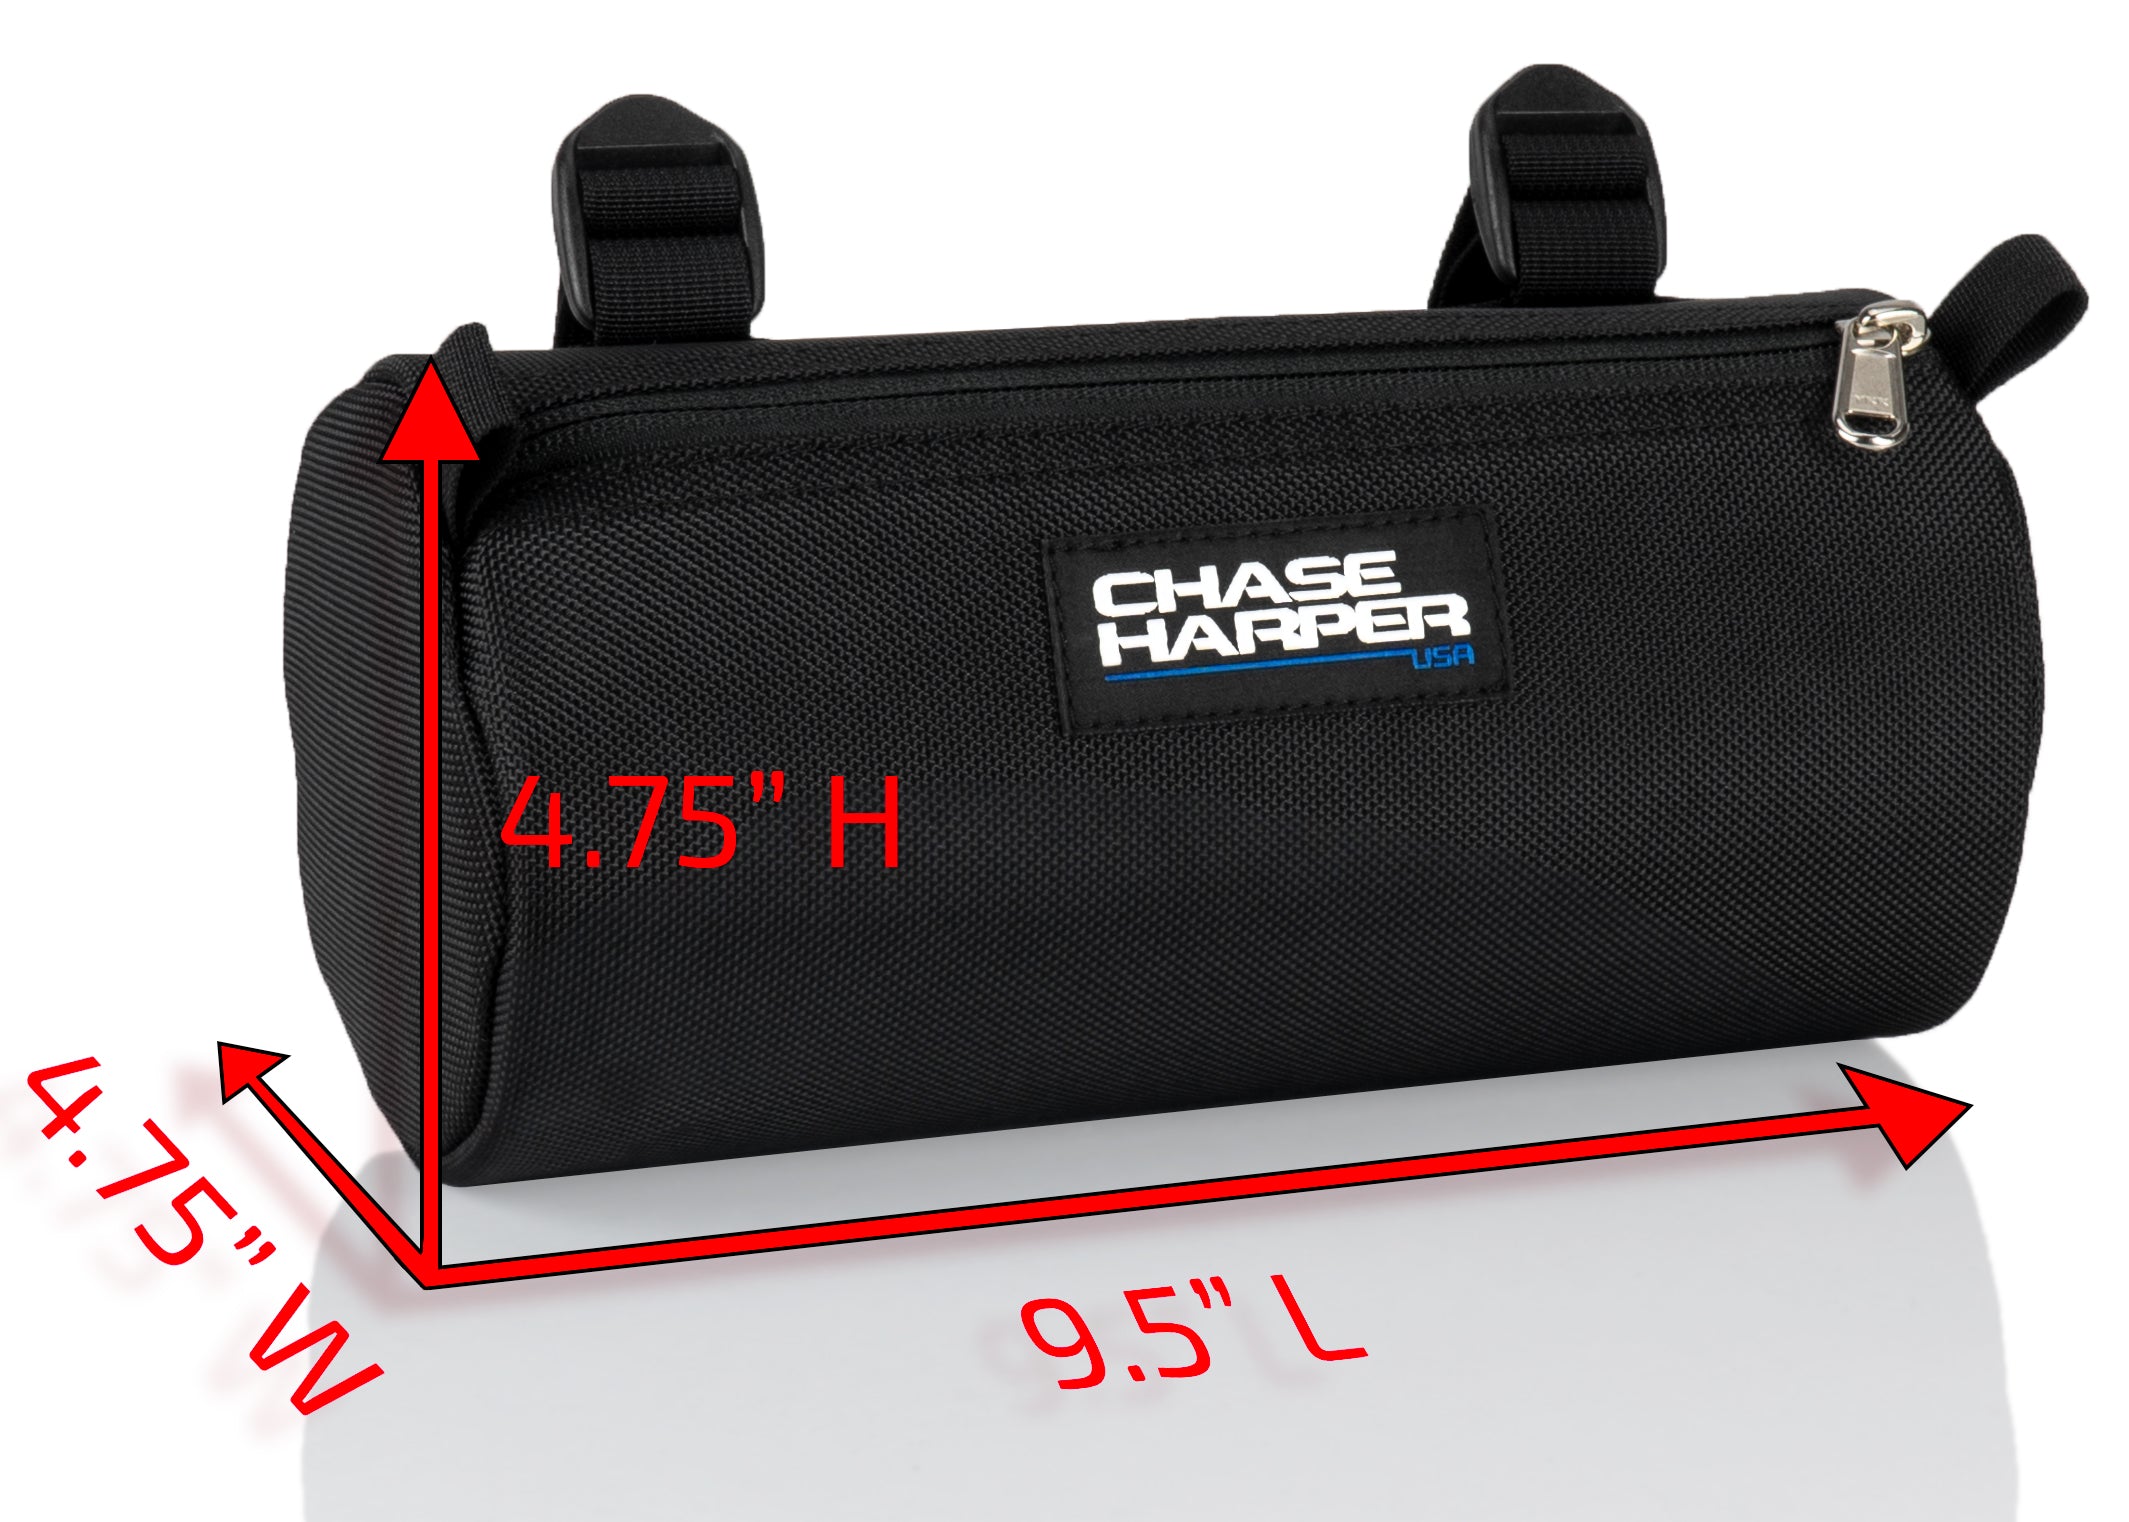 Chase Harper USA, The Best Motorcycle Luggage,Tank bags,Tail Trunks